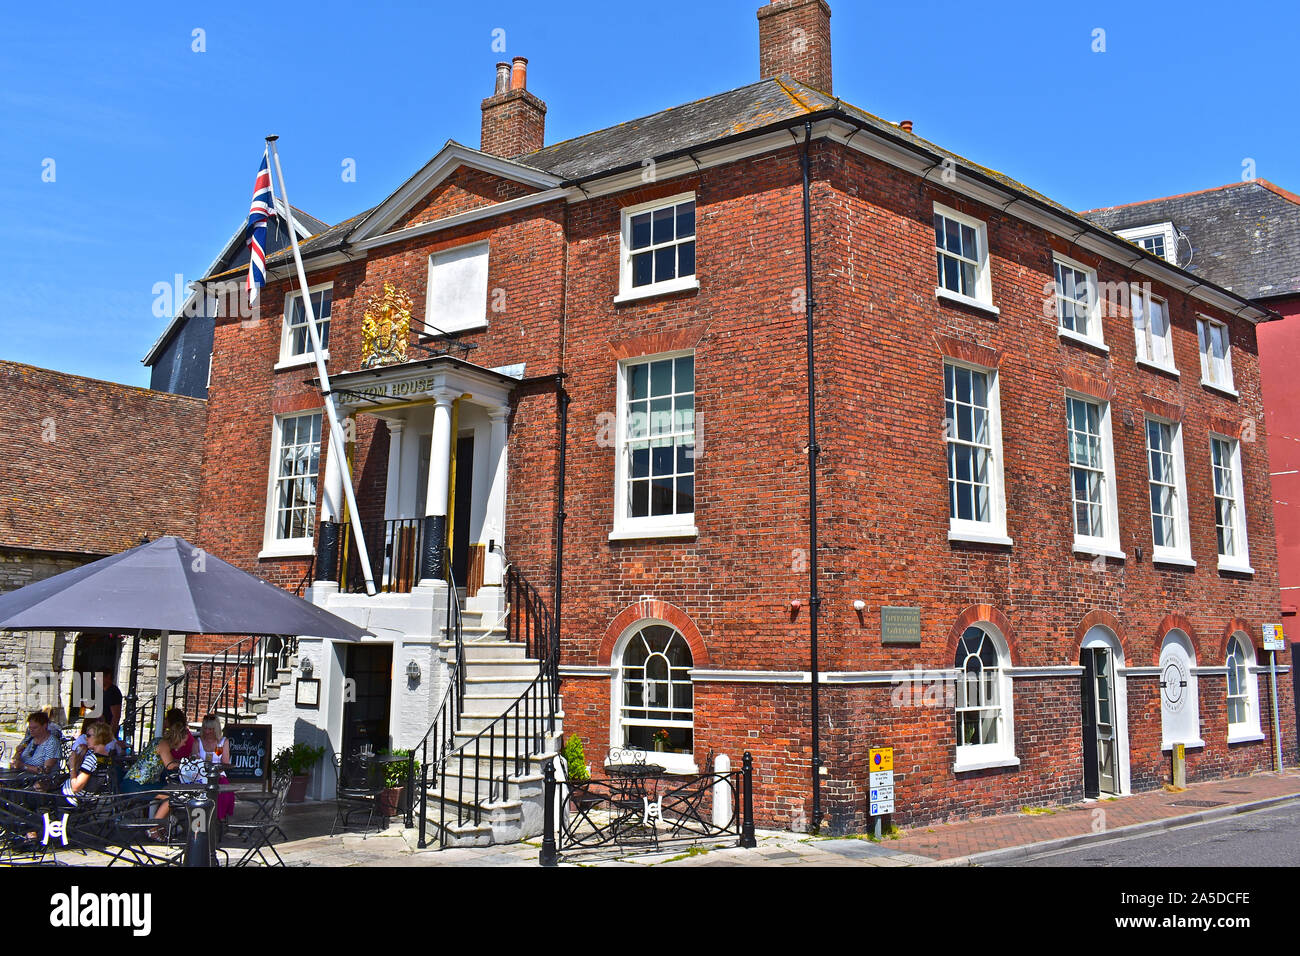 The Custom House Café on the quayside in Old Poole, with views across the harbour. People enjoying the summer sun sitting outside this historic house. Stock Photo